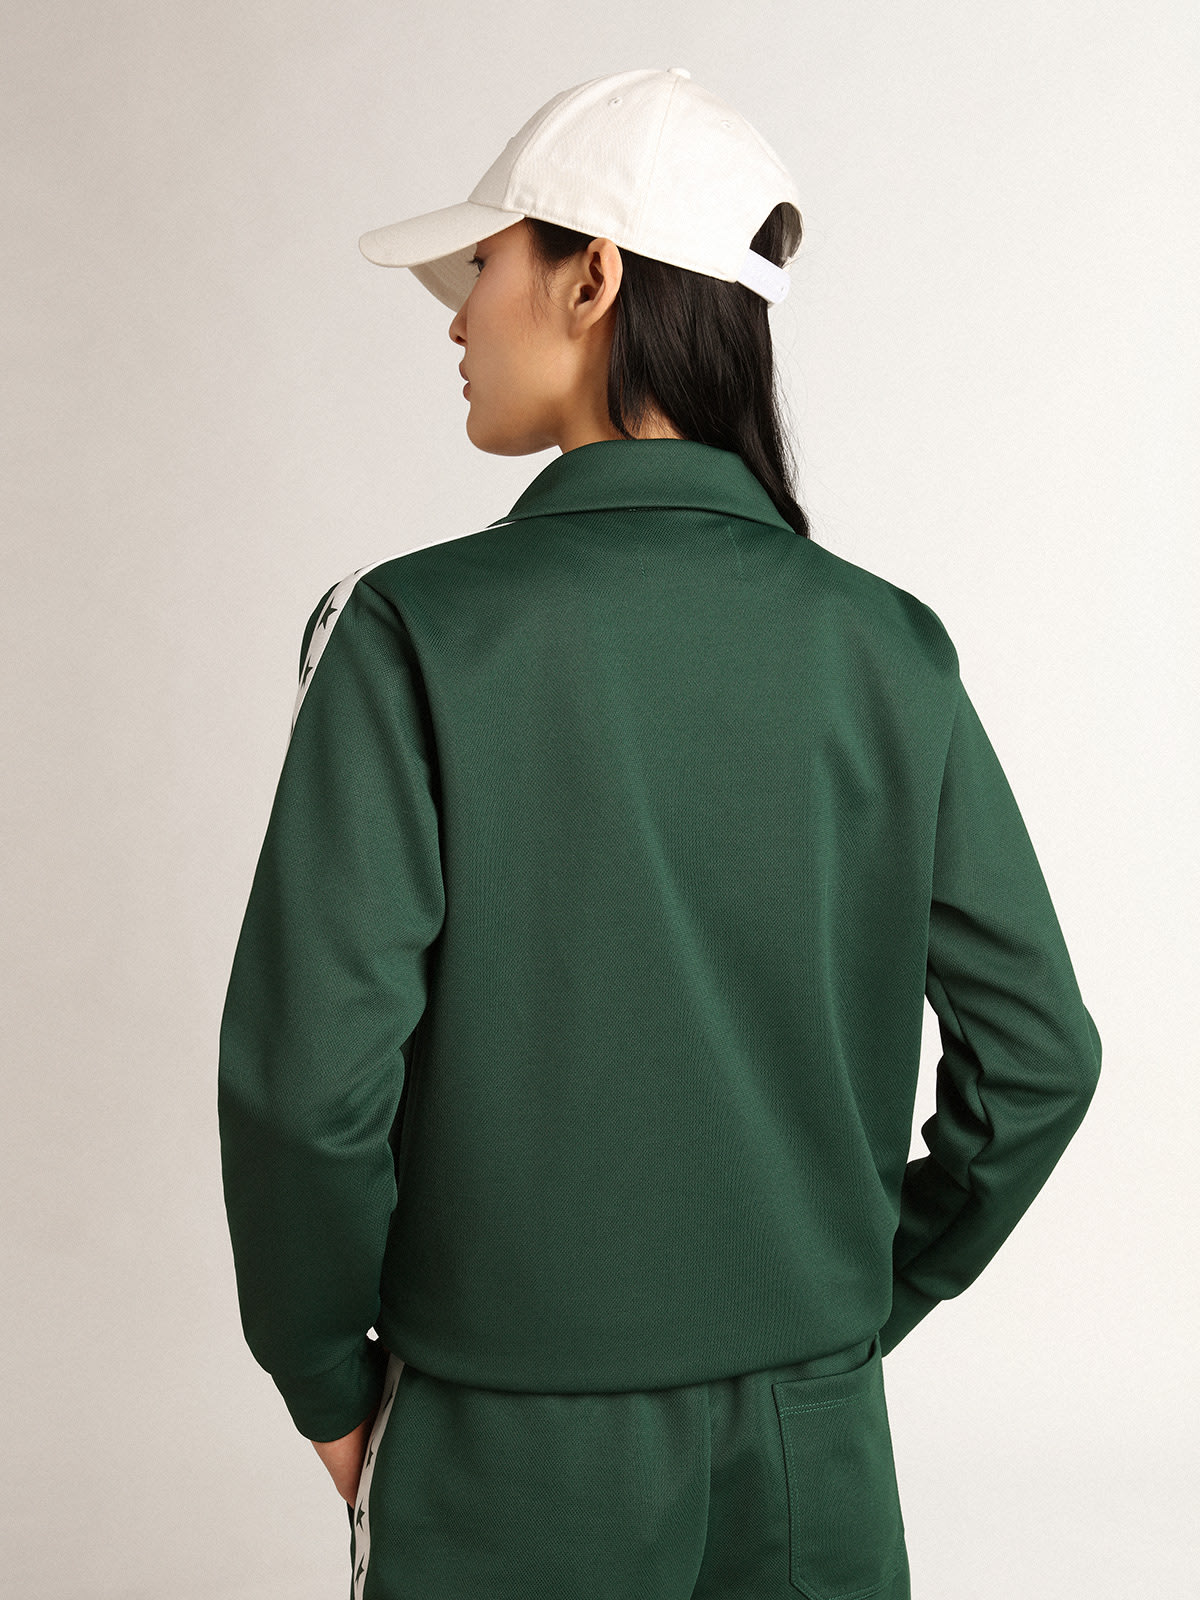 Golden Goose - Bright-green Denise Star Collection zipped sweatshirt with white strip and contrasting green stars in 